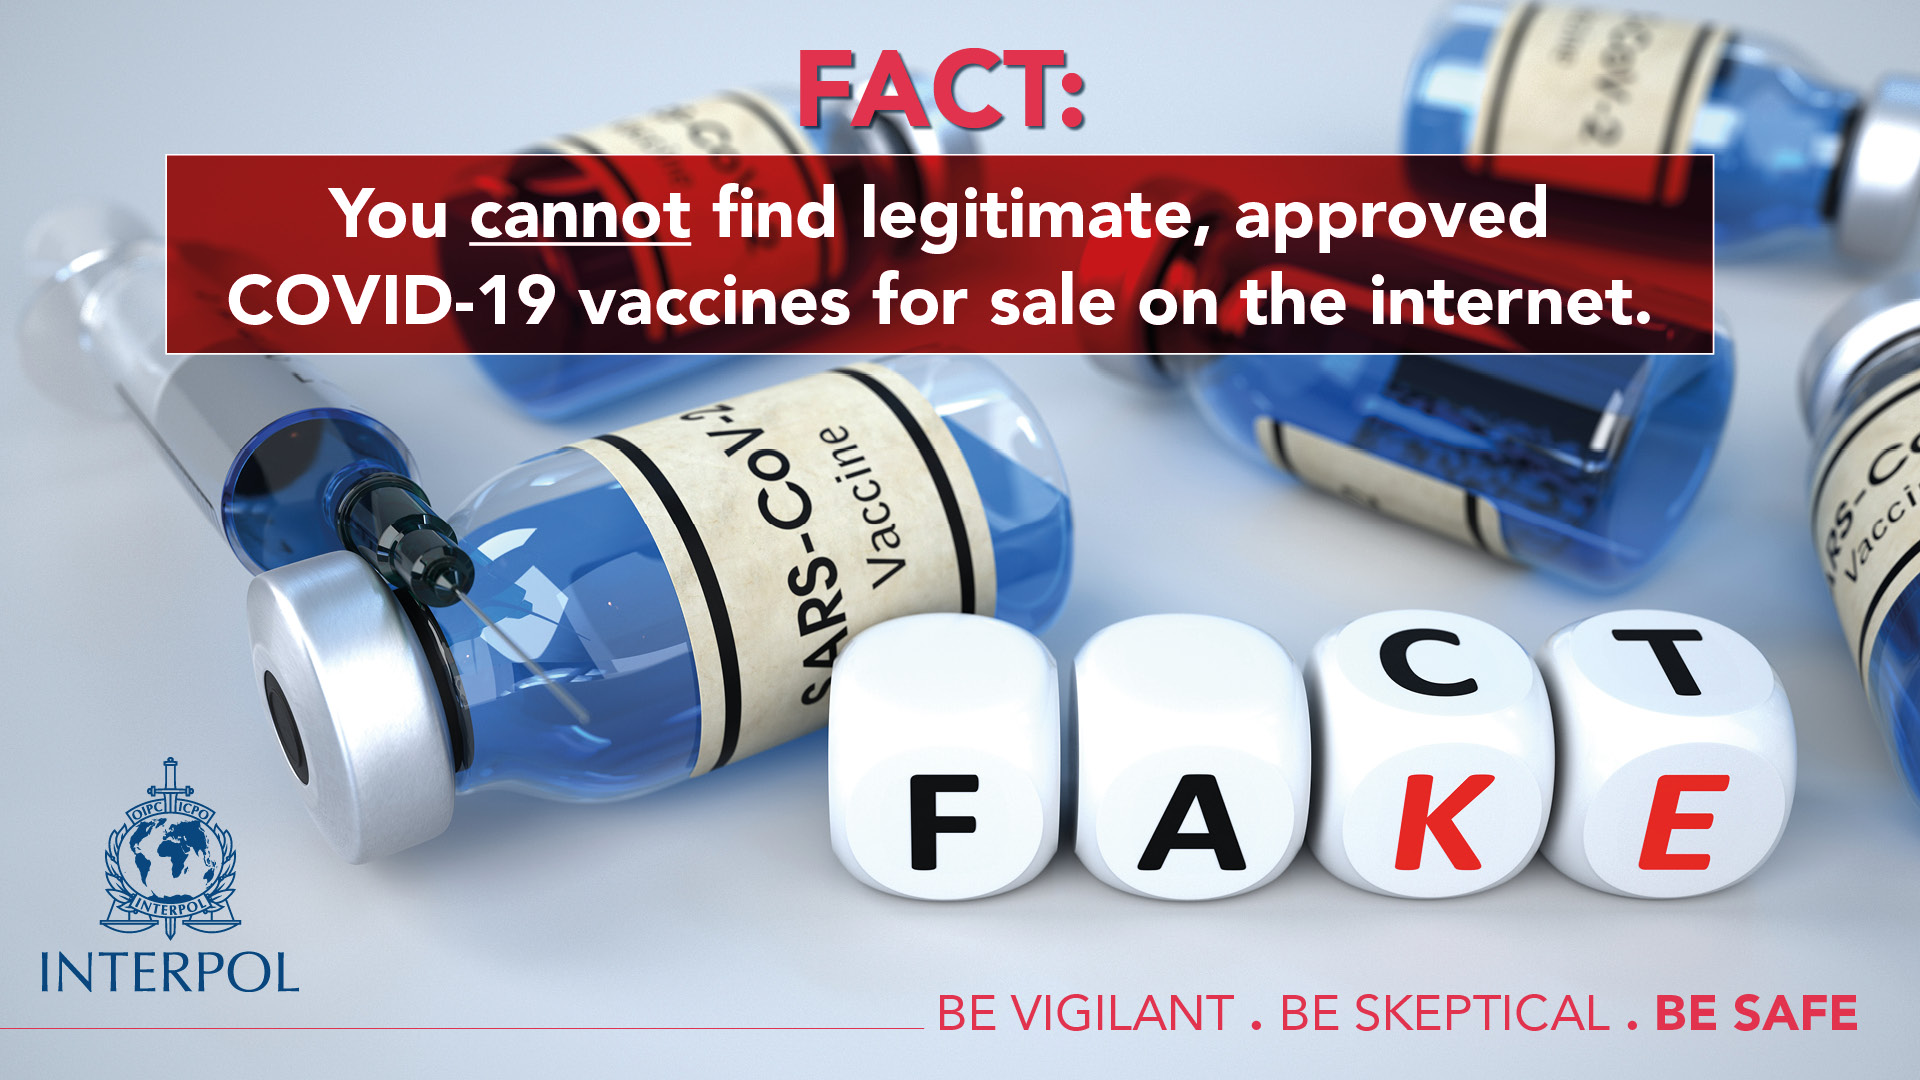 Fact: You cannot find legitimate, approved COVID-19 vaccines for sale on the internet.